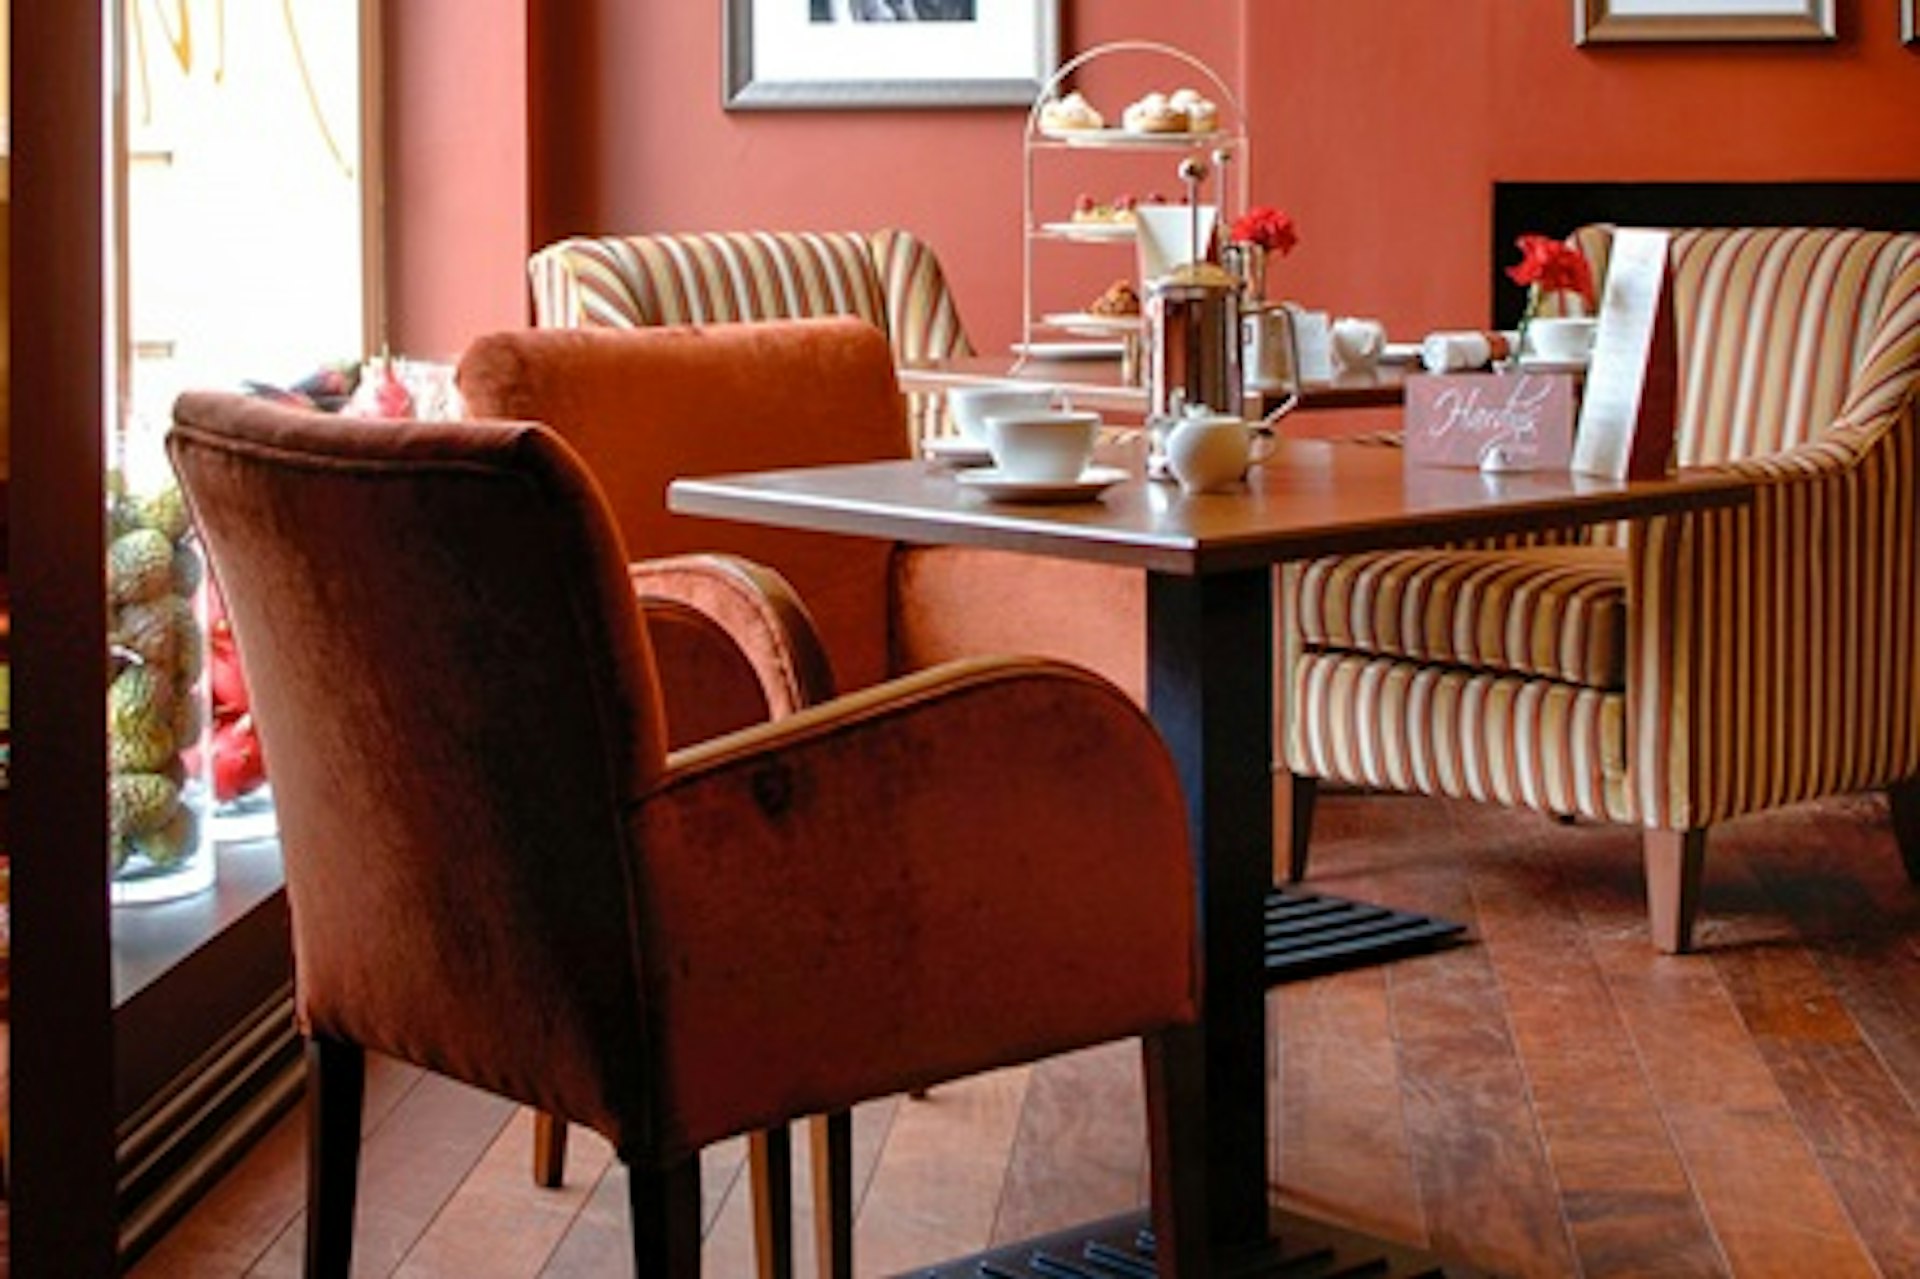 Champagne Afternoon Tea for Two at The White Swan Hotel 2